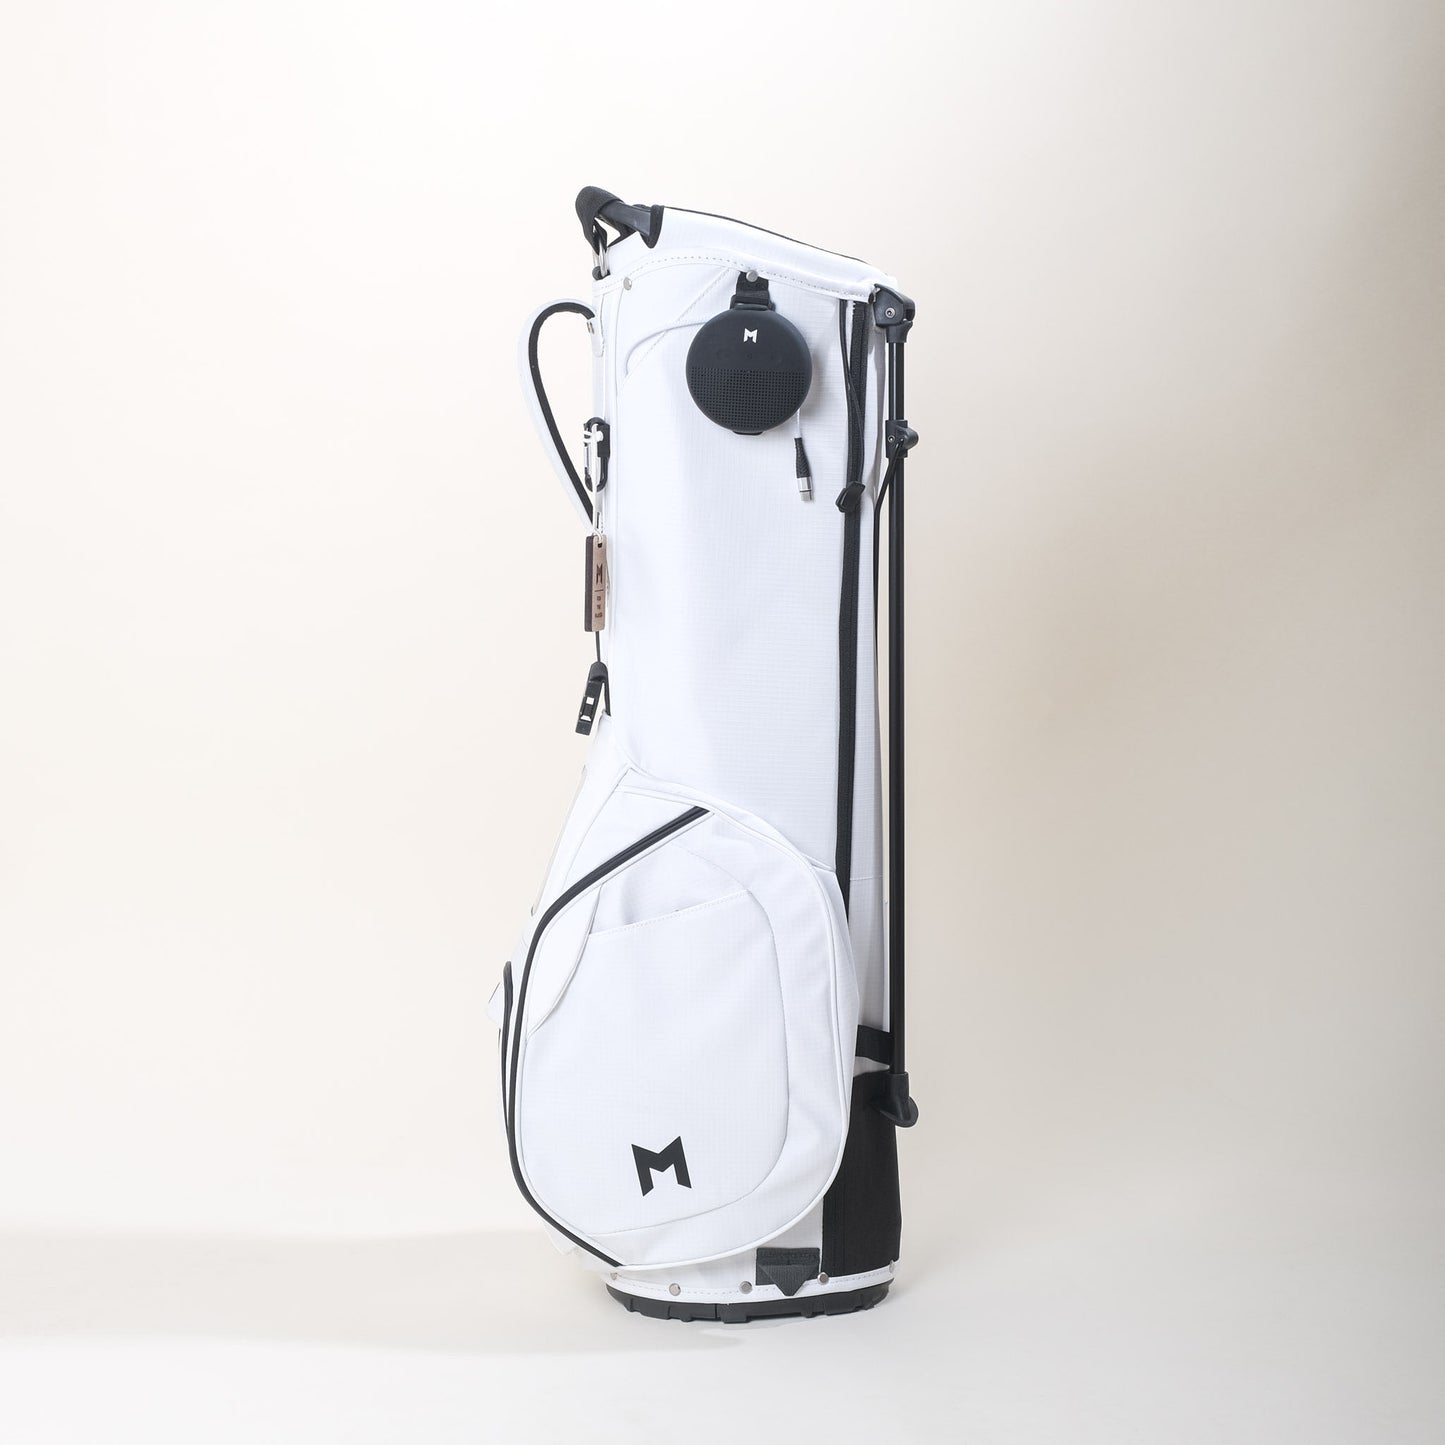 This is the white MR1, our recycled golf bag, by MNML GOLF.